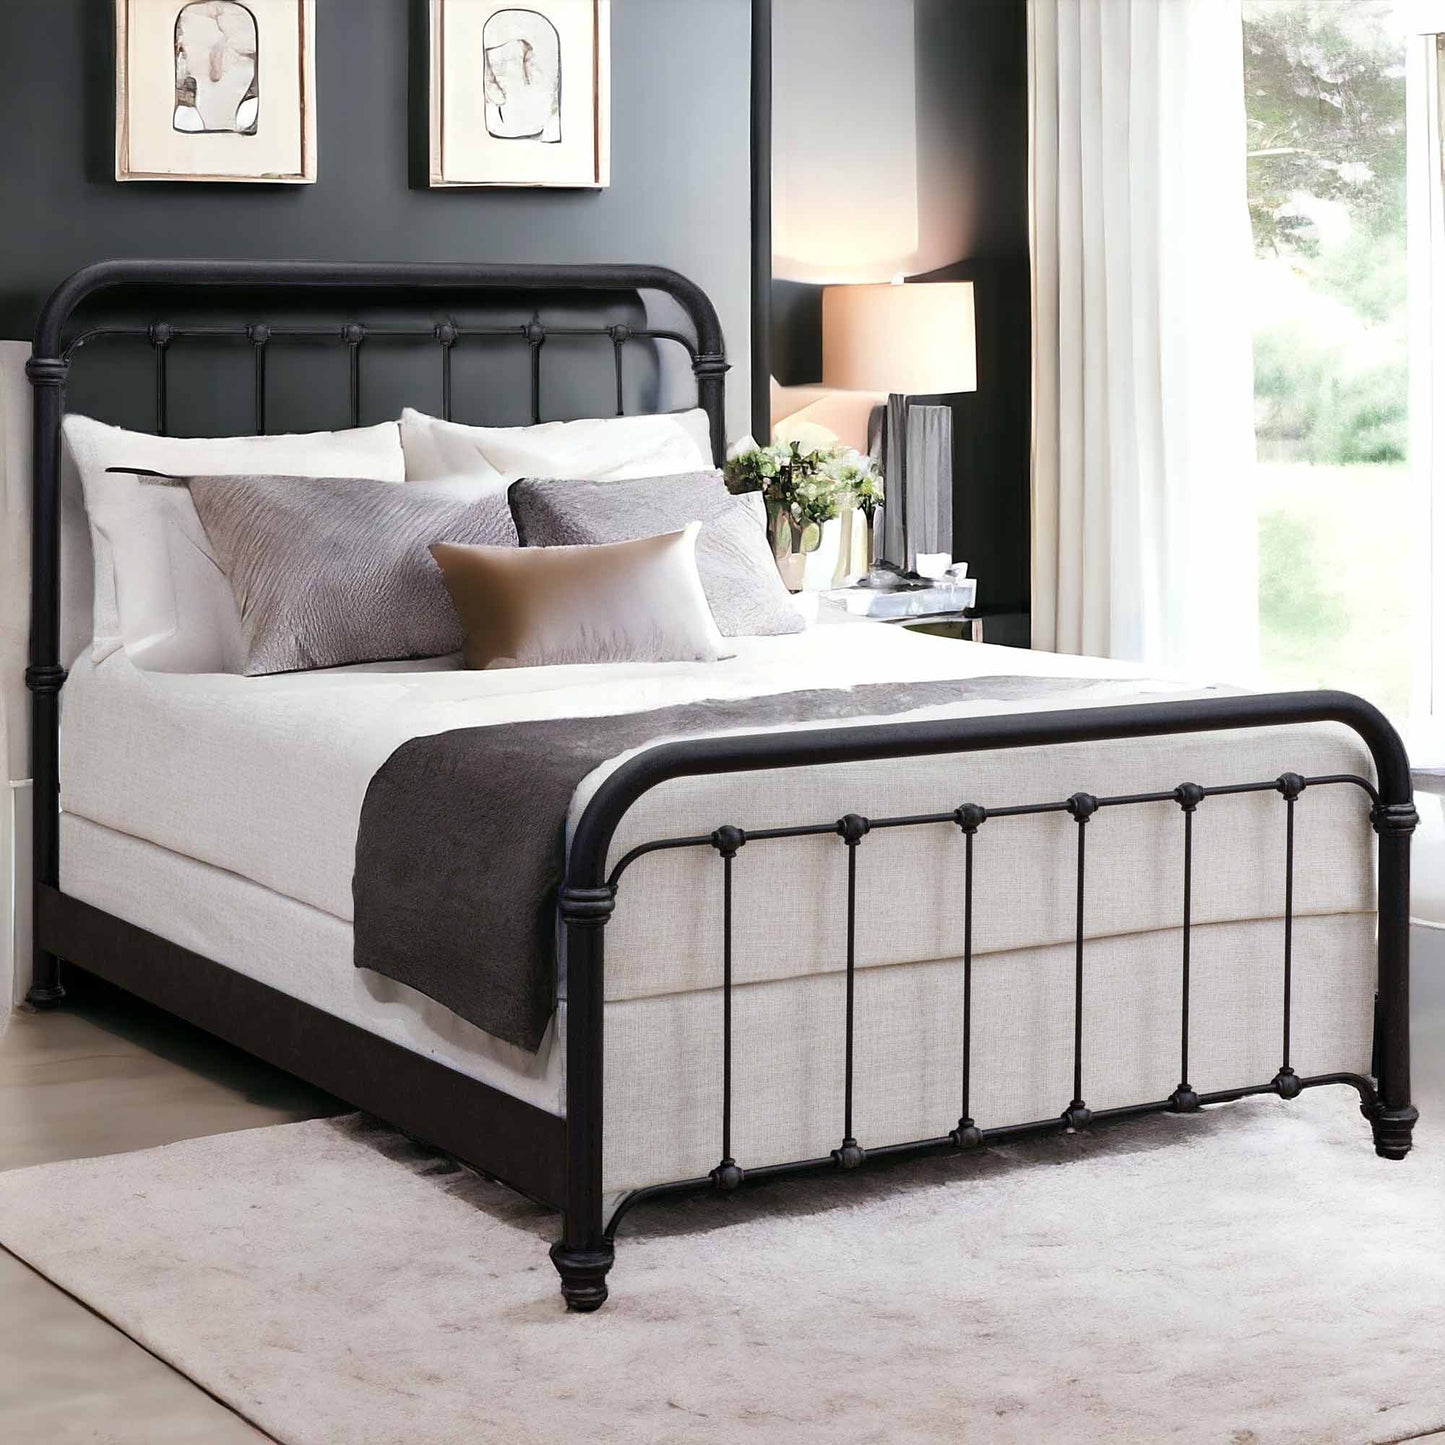 Matriae's Braden Iron Bed 1001 Wesley Allen Aged Iron Finish Queen Size Wrought Iron Bed